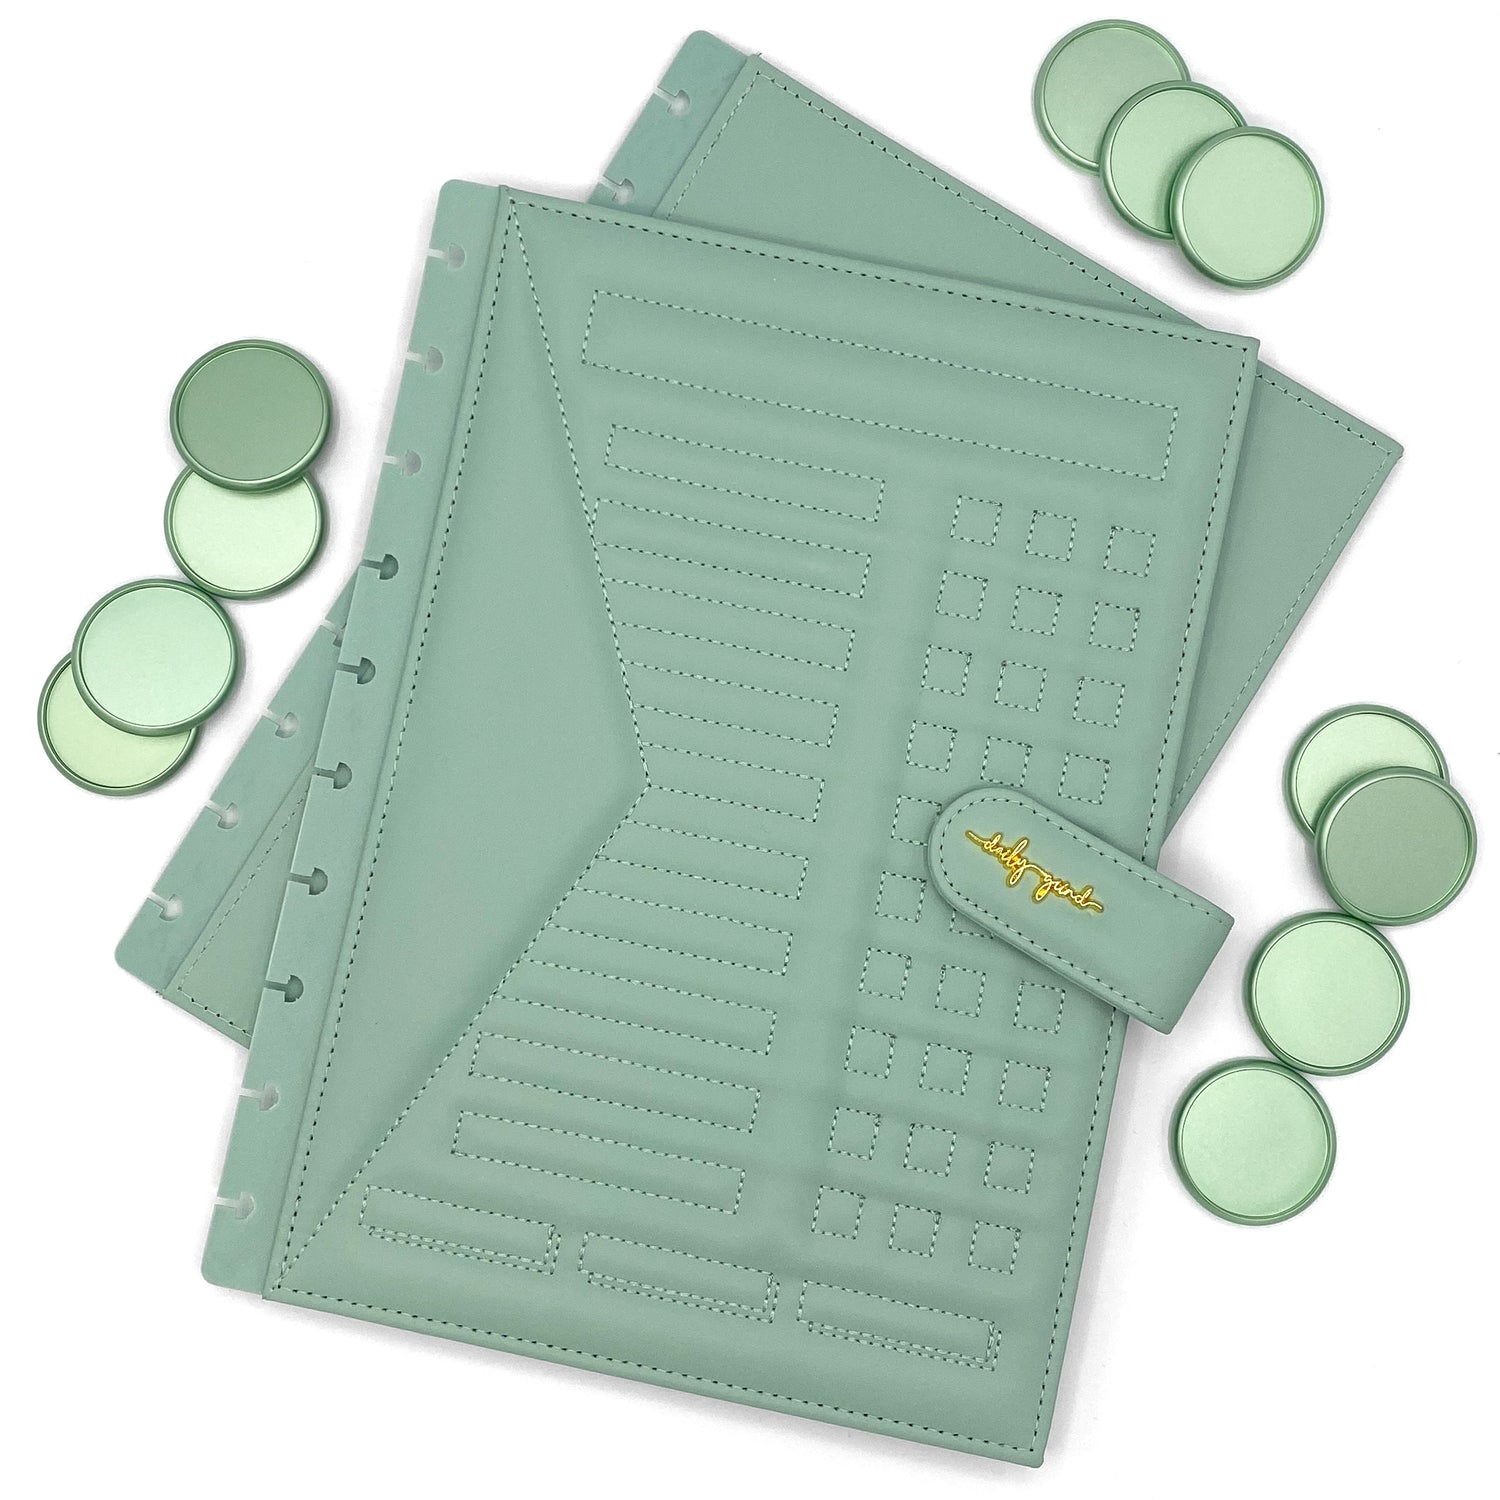 Green faux leather planner covers and discs